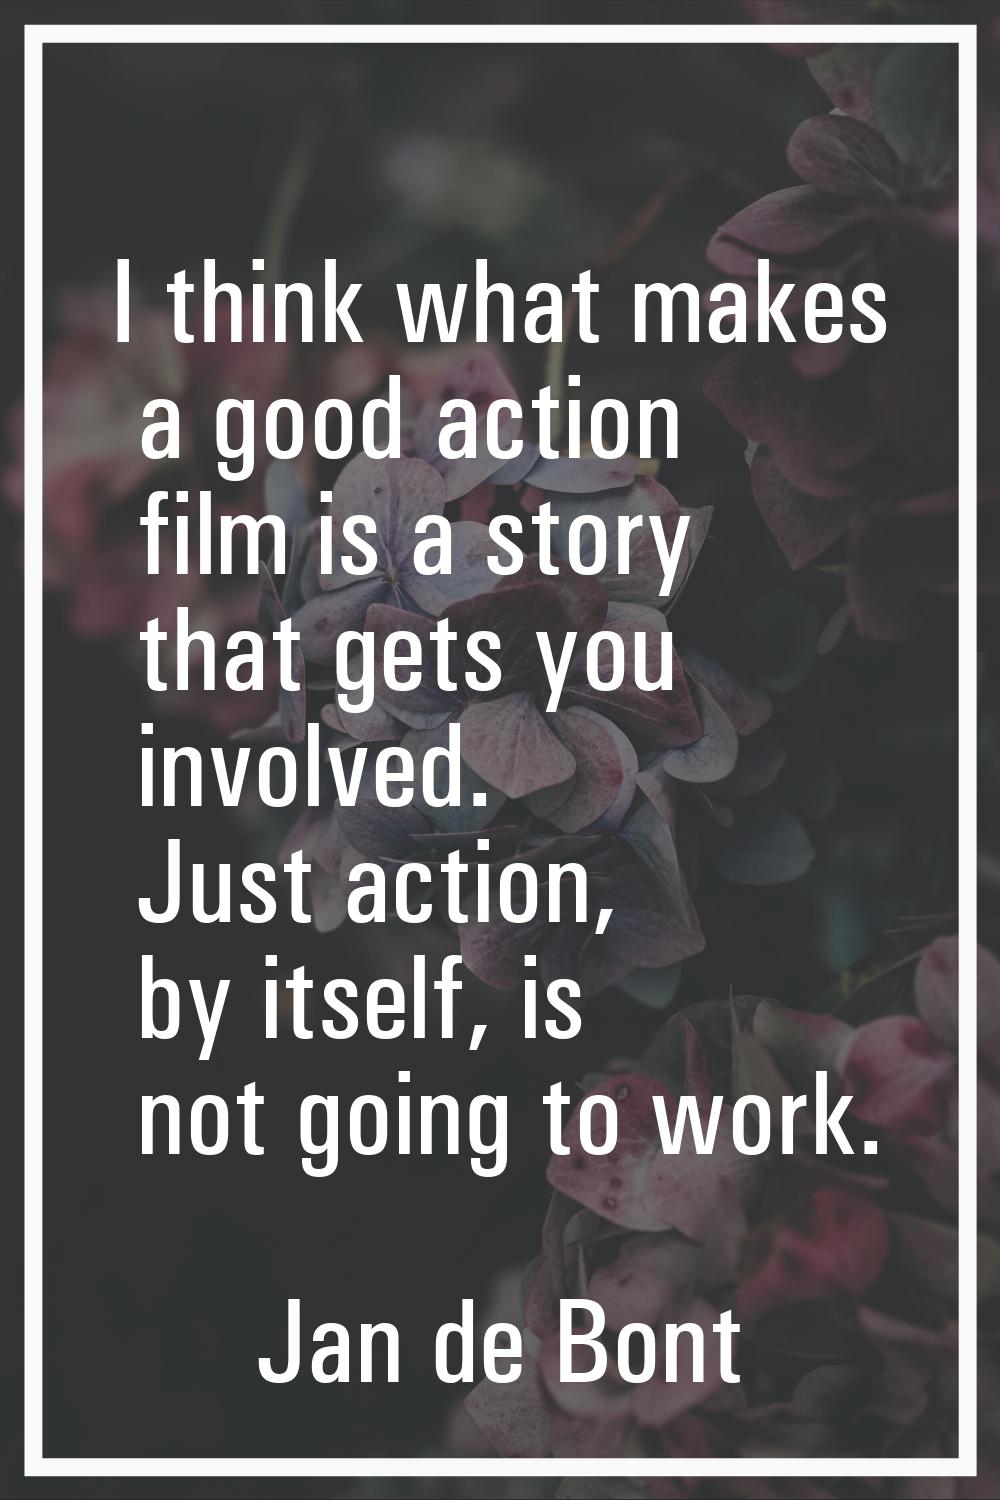 I think what makes a good action film is a story that gets you involved. Just action, by itself, is